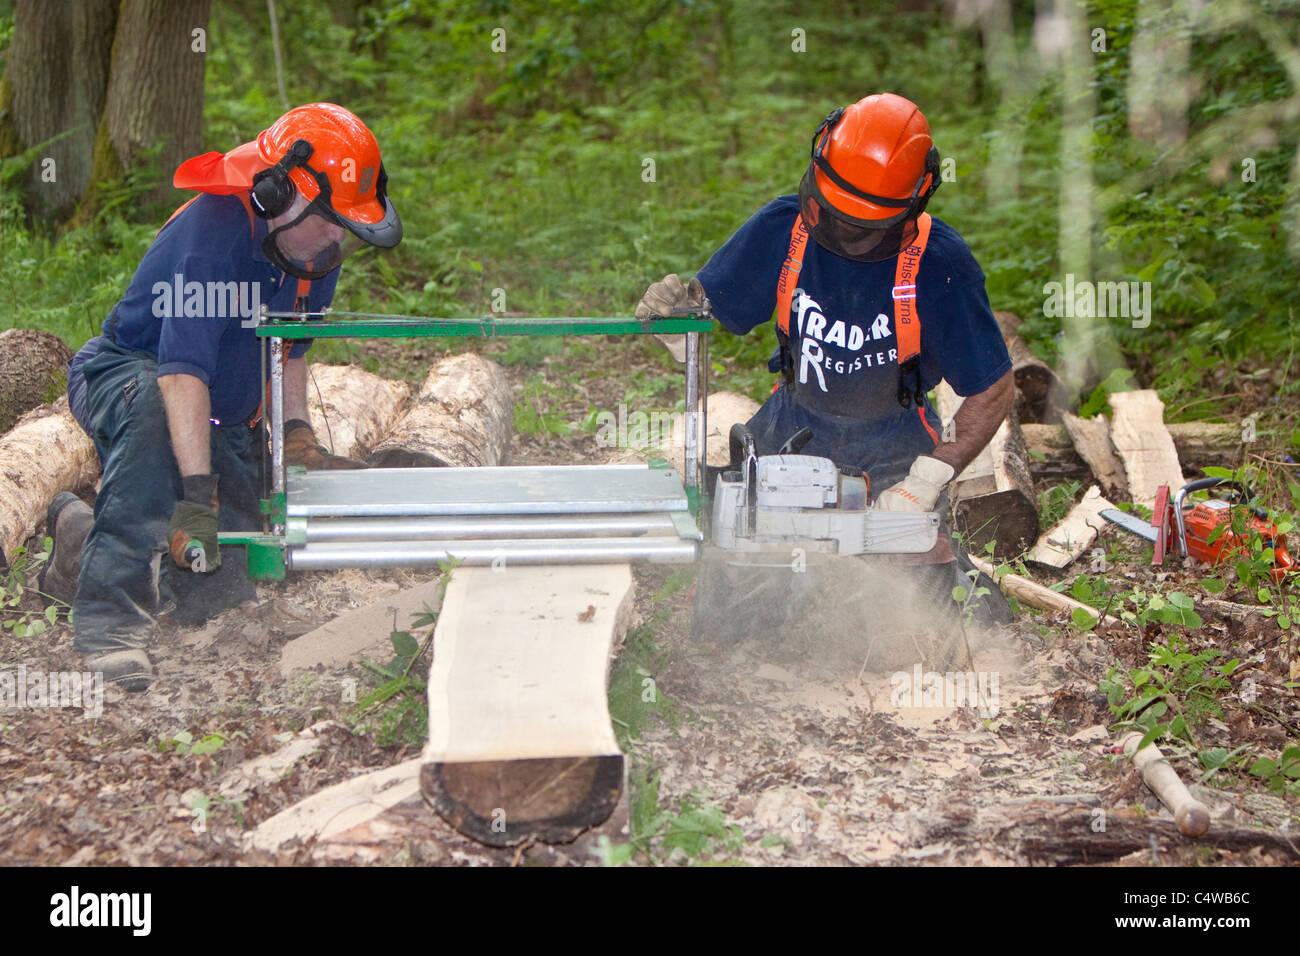 Making timber planks with a chainsaw, England, UK Stock Photo